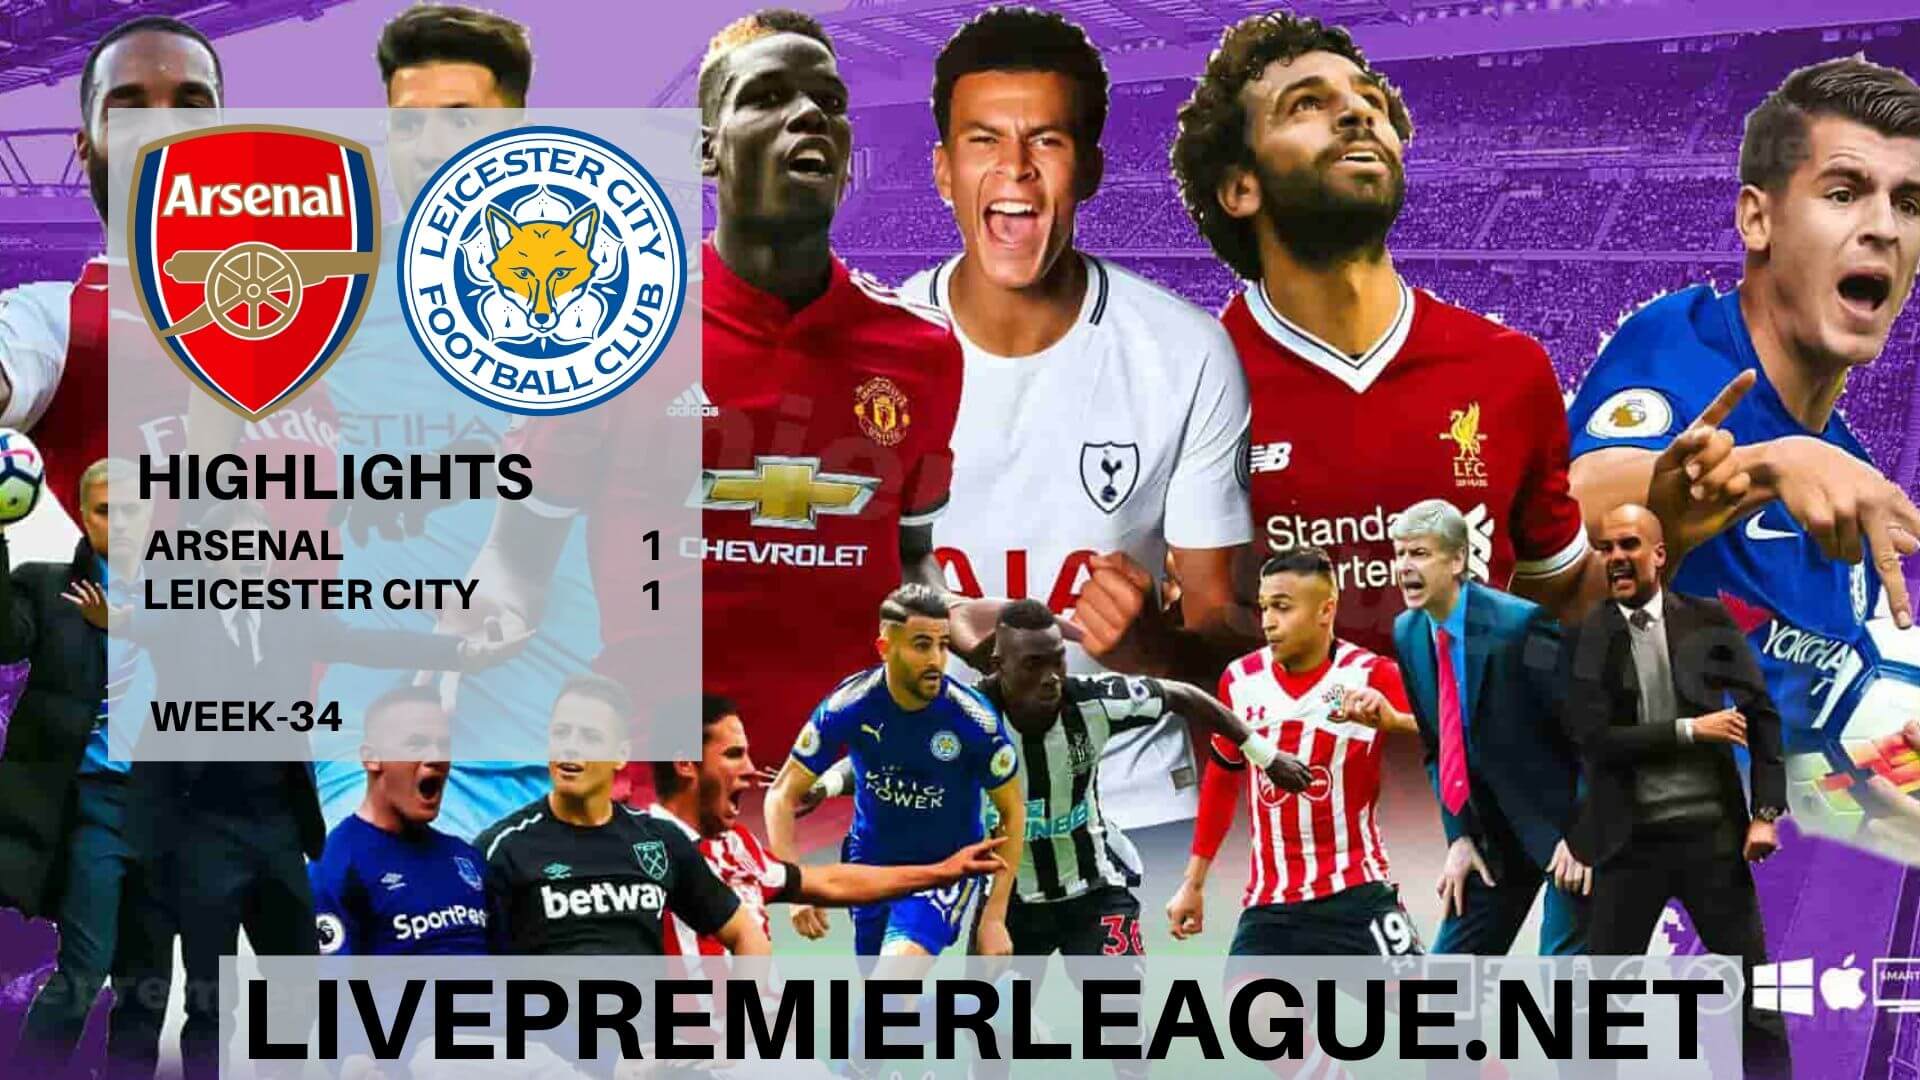 Arsenal Vs Leicester City Highlights 2020 Week 34